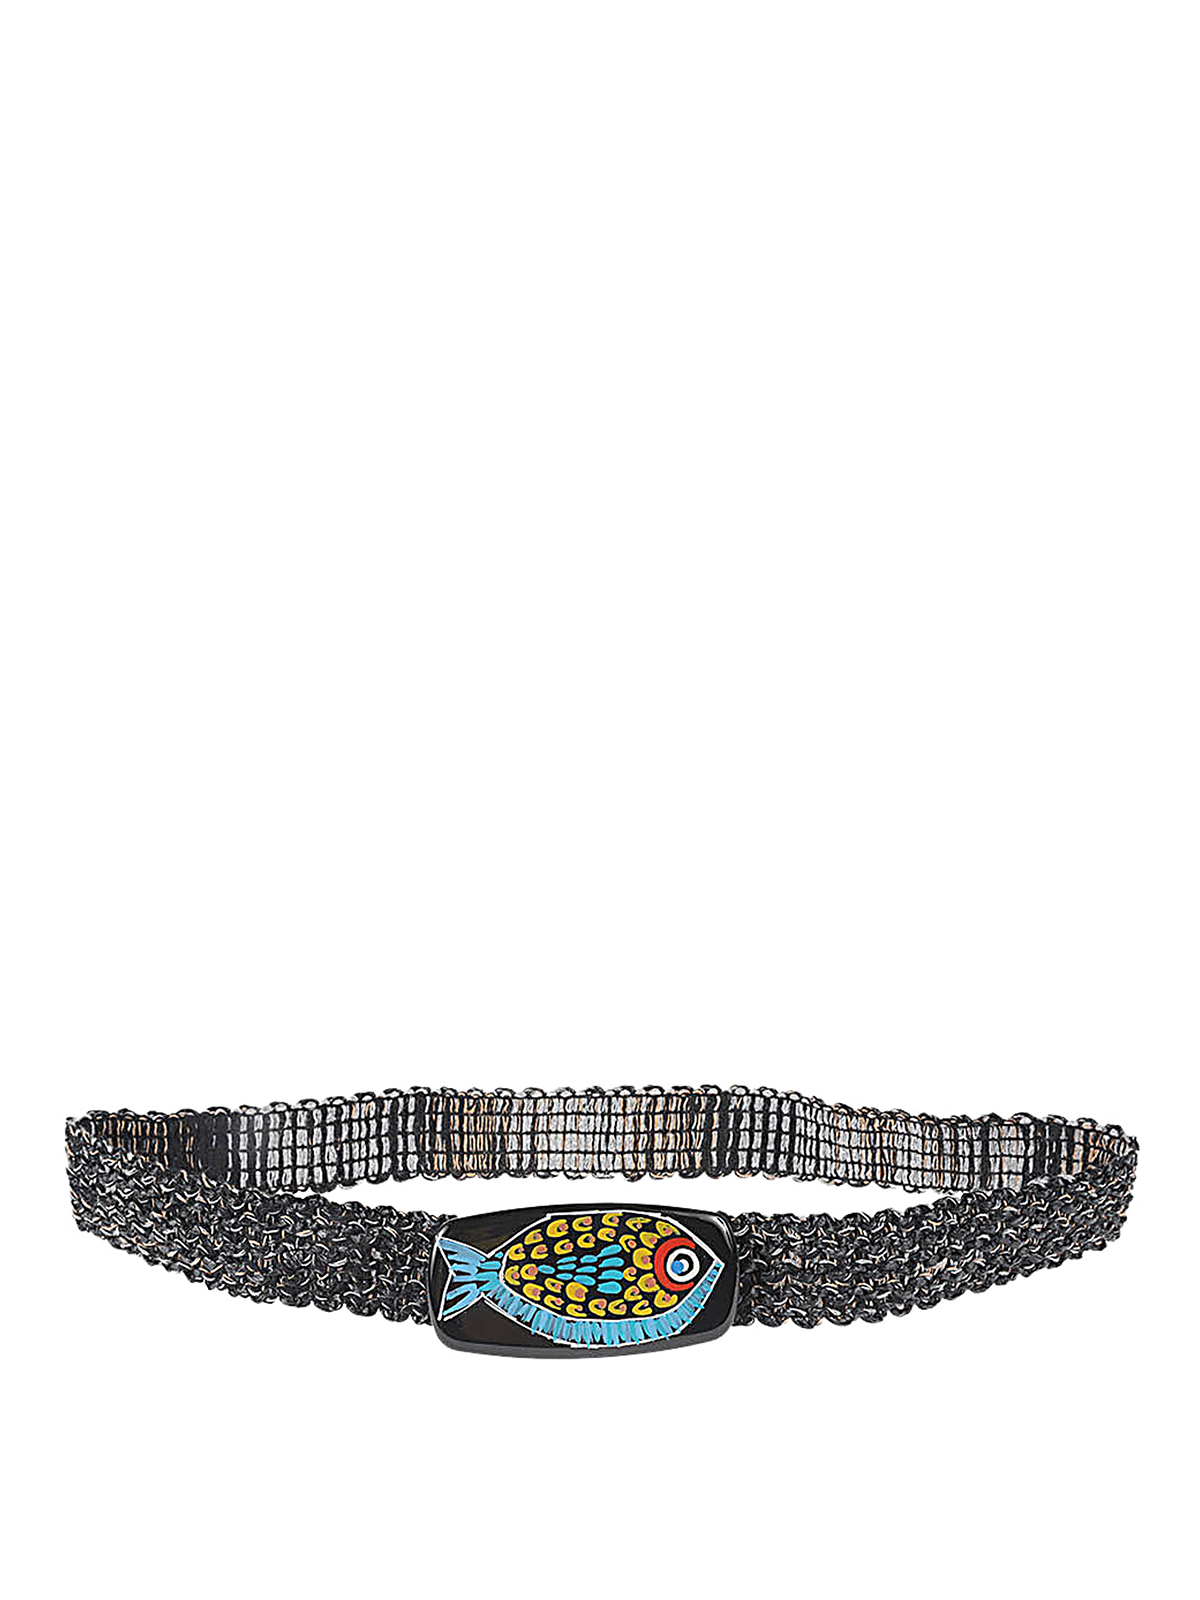 Exquisite J Raffia Belt With Painted Buckle In Black